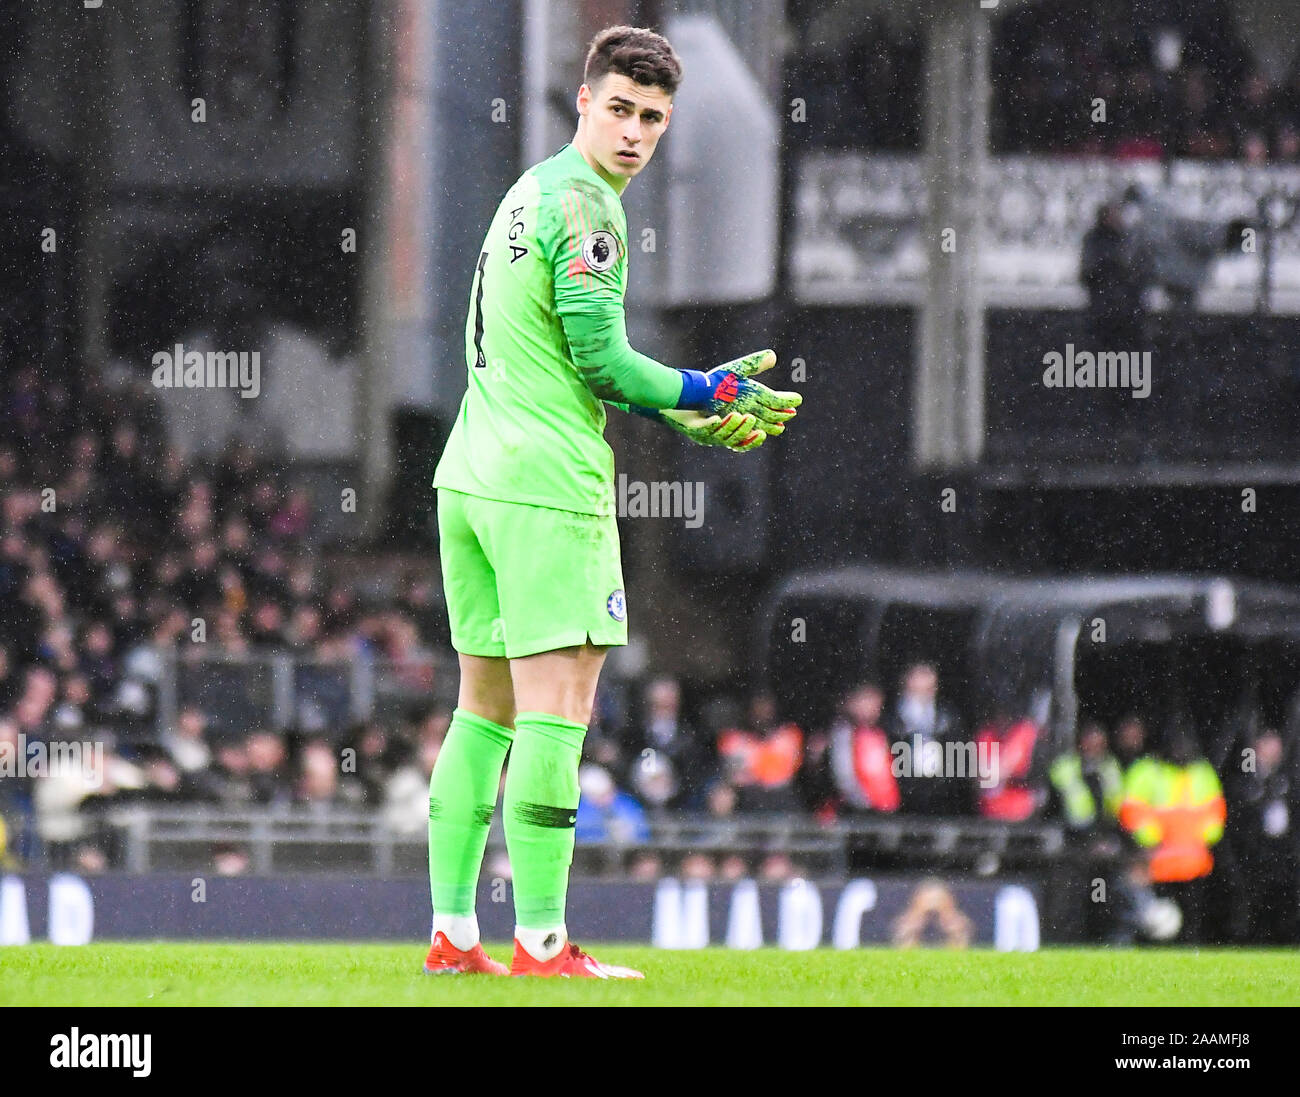 LONDON, ENGLAND - MARCH 3, 2019: Kepa Arrizabalaga of Chelsea pictured during the 2018/19 Premier League game between Fulham FC and Chelsea FC at Craven Cottage. Stock Photo